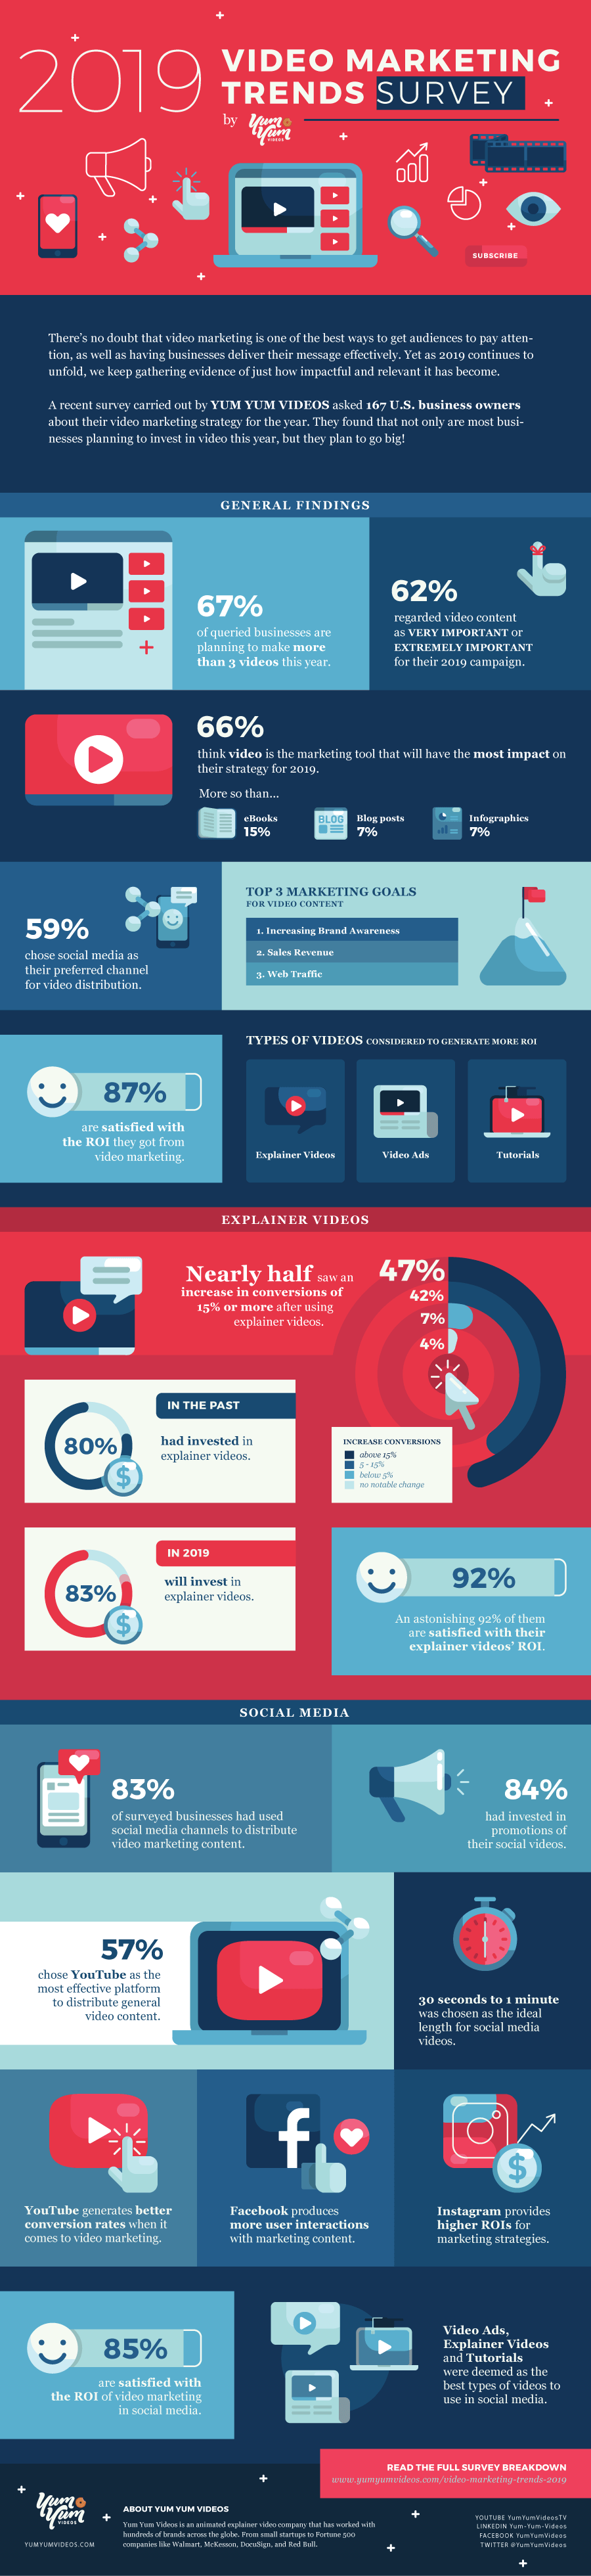 video marketing trends for 2019